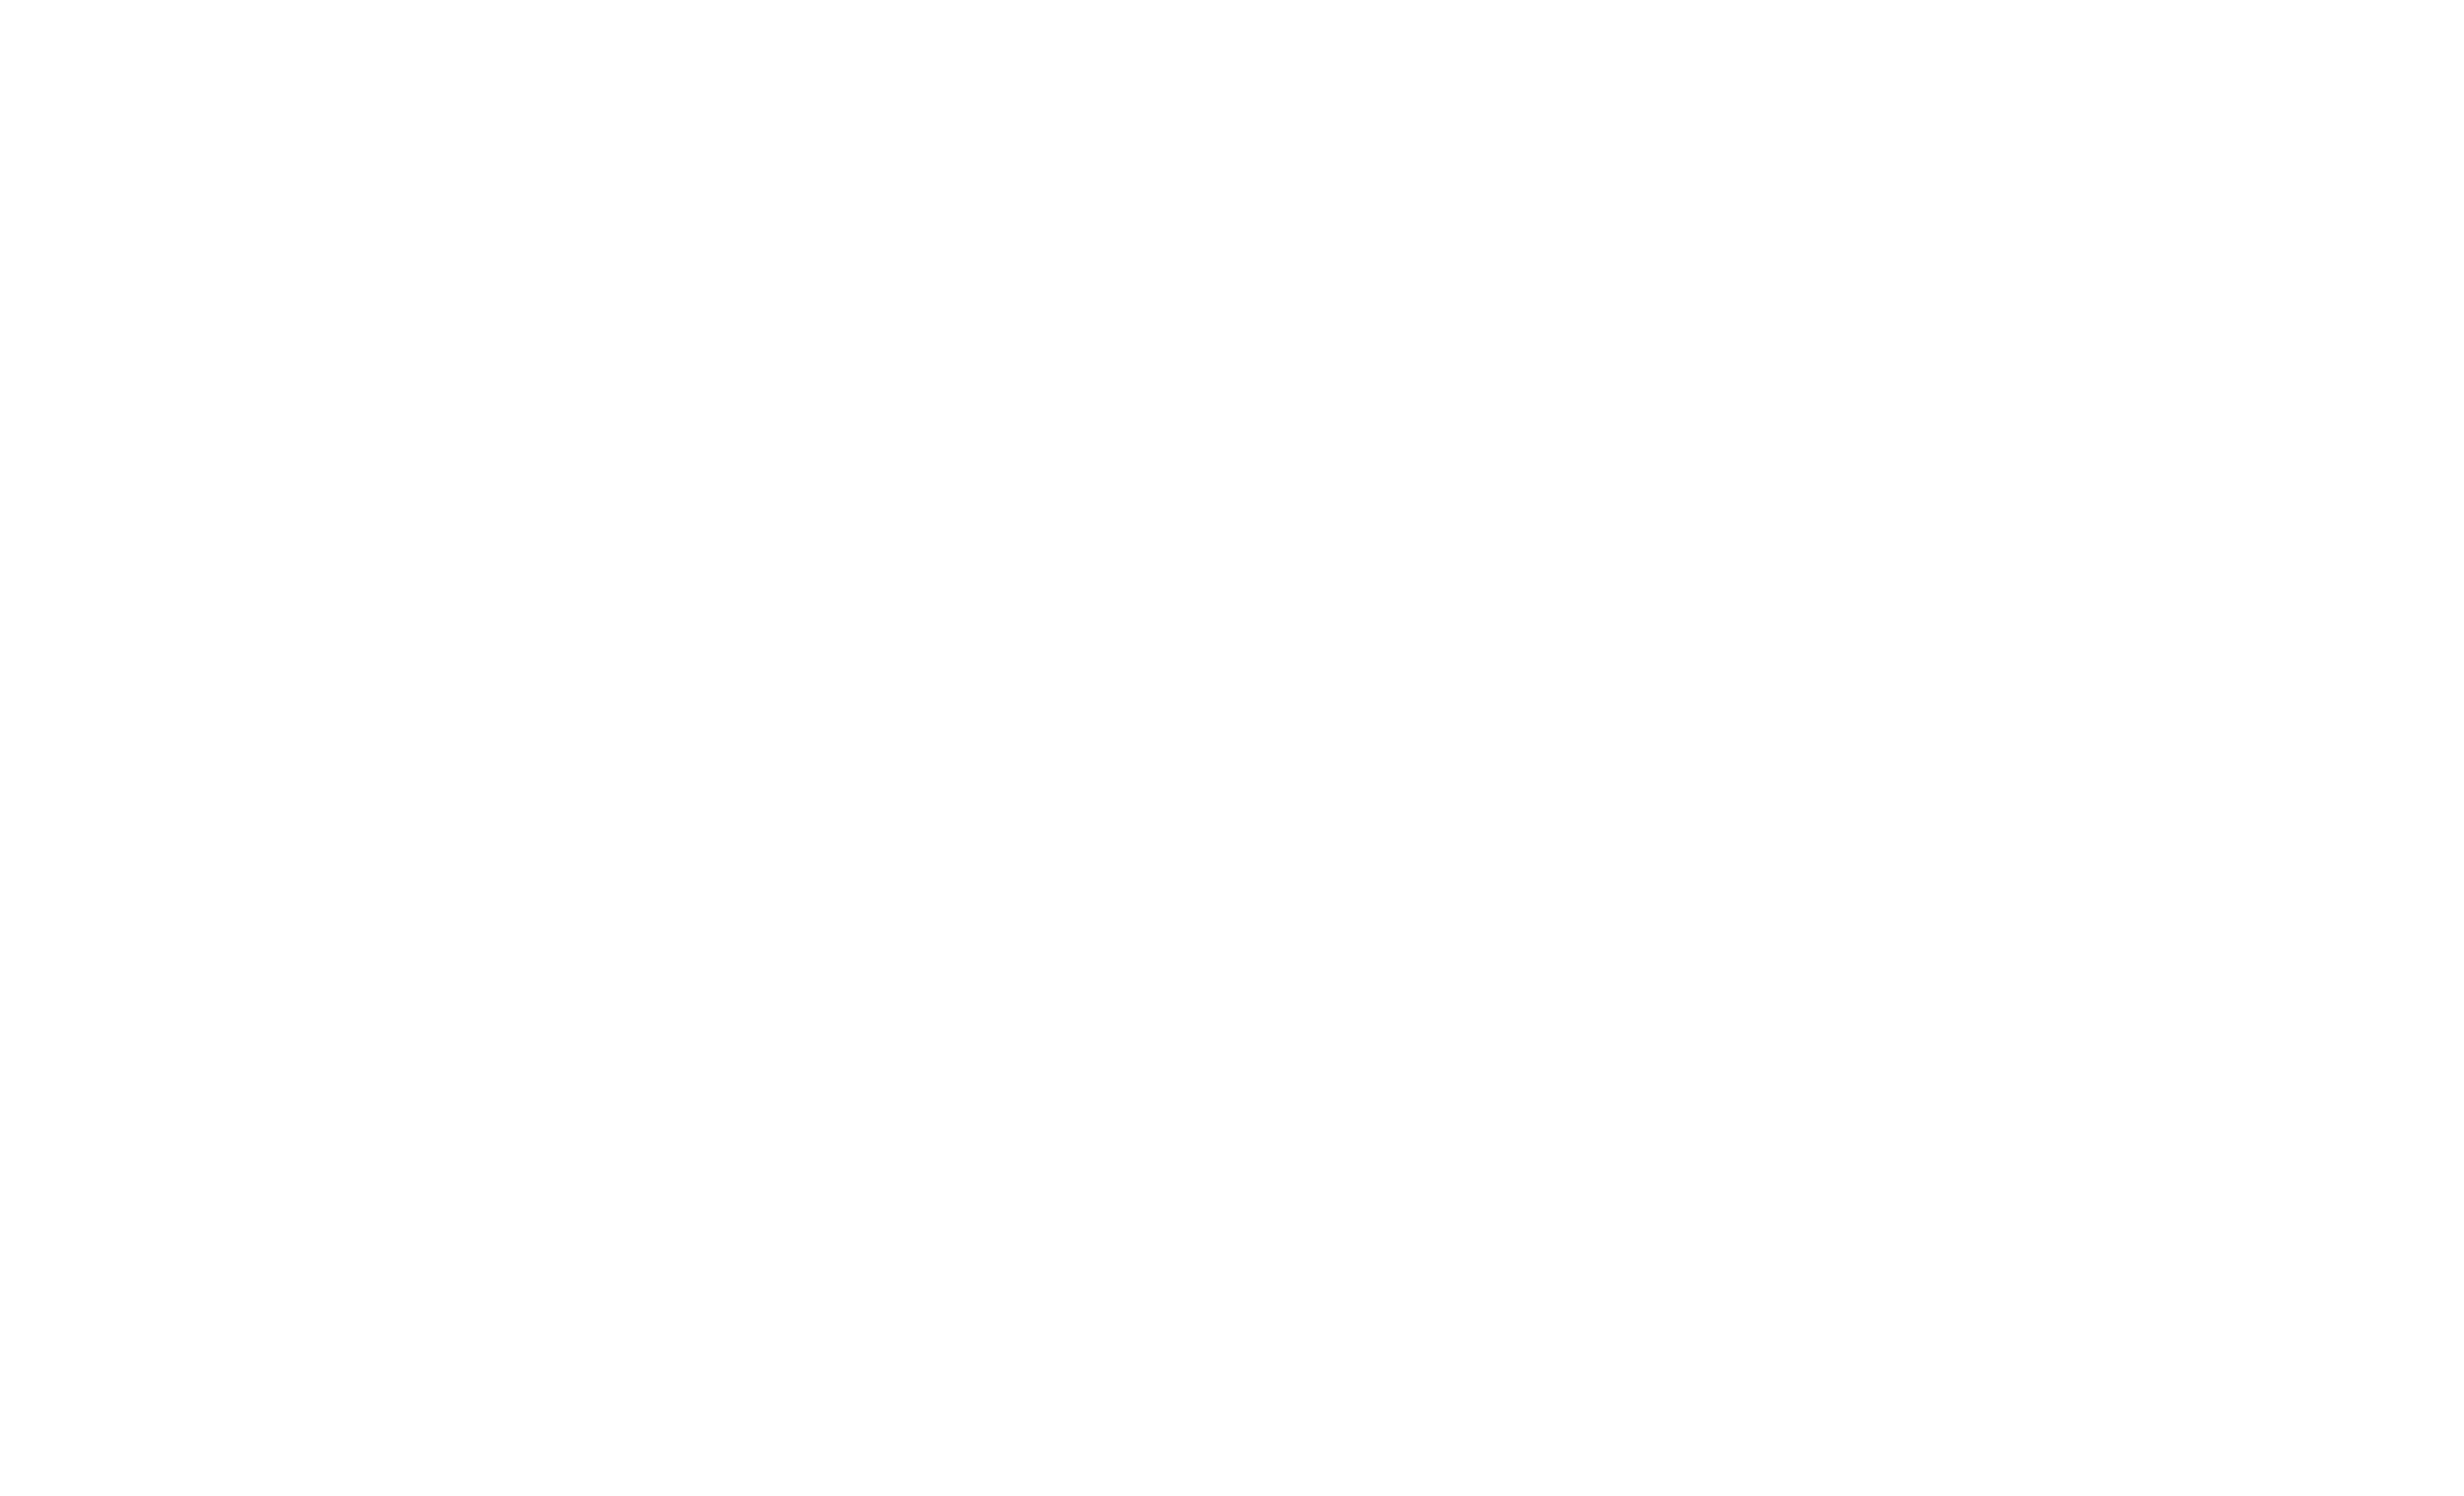 Middlesex_Tree_Service-01